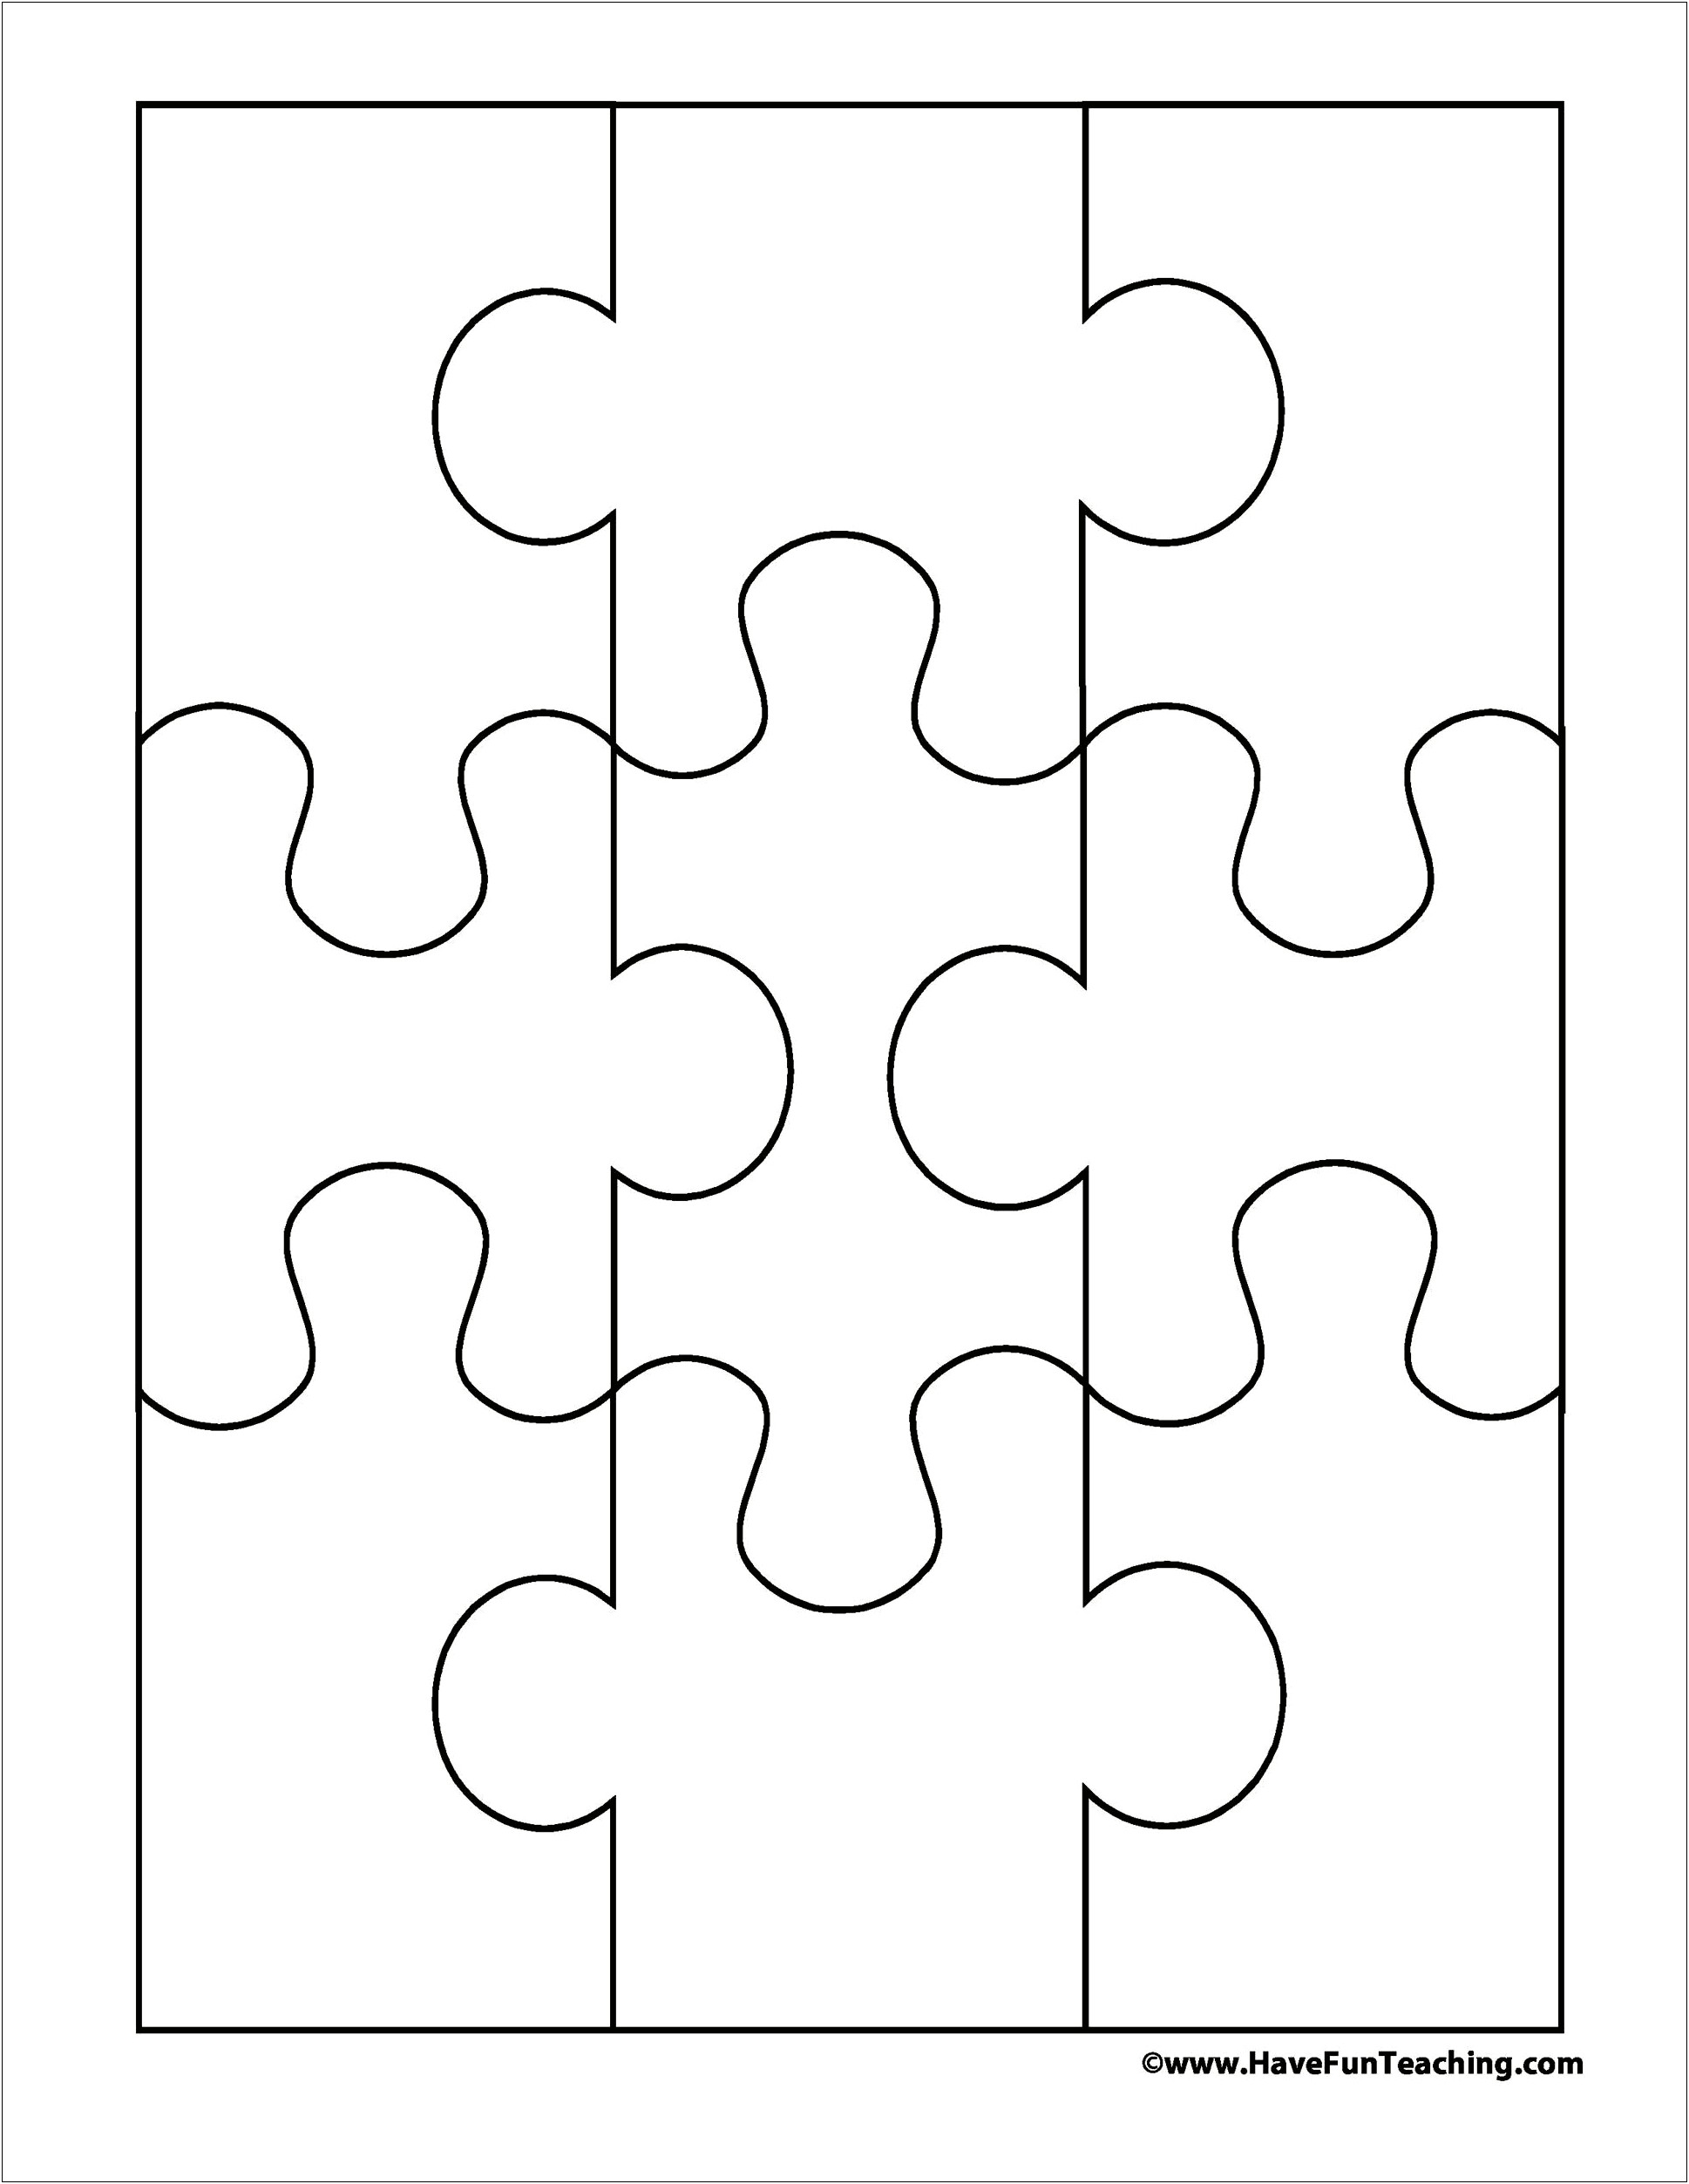 Free Templates Shapes To Cut Out From Paper